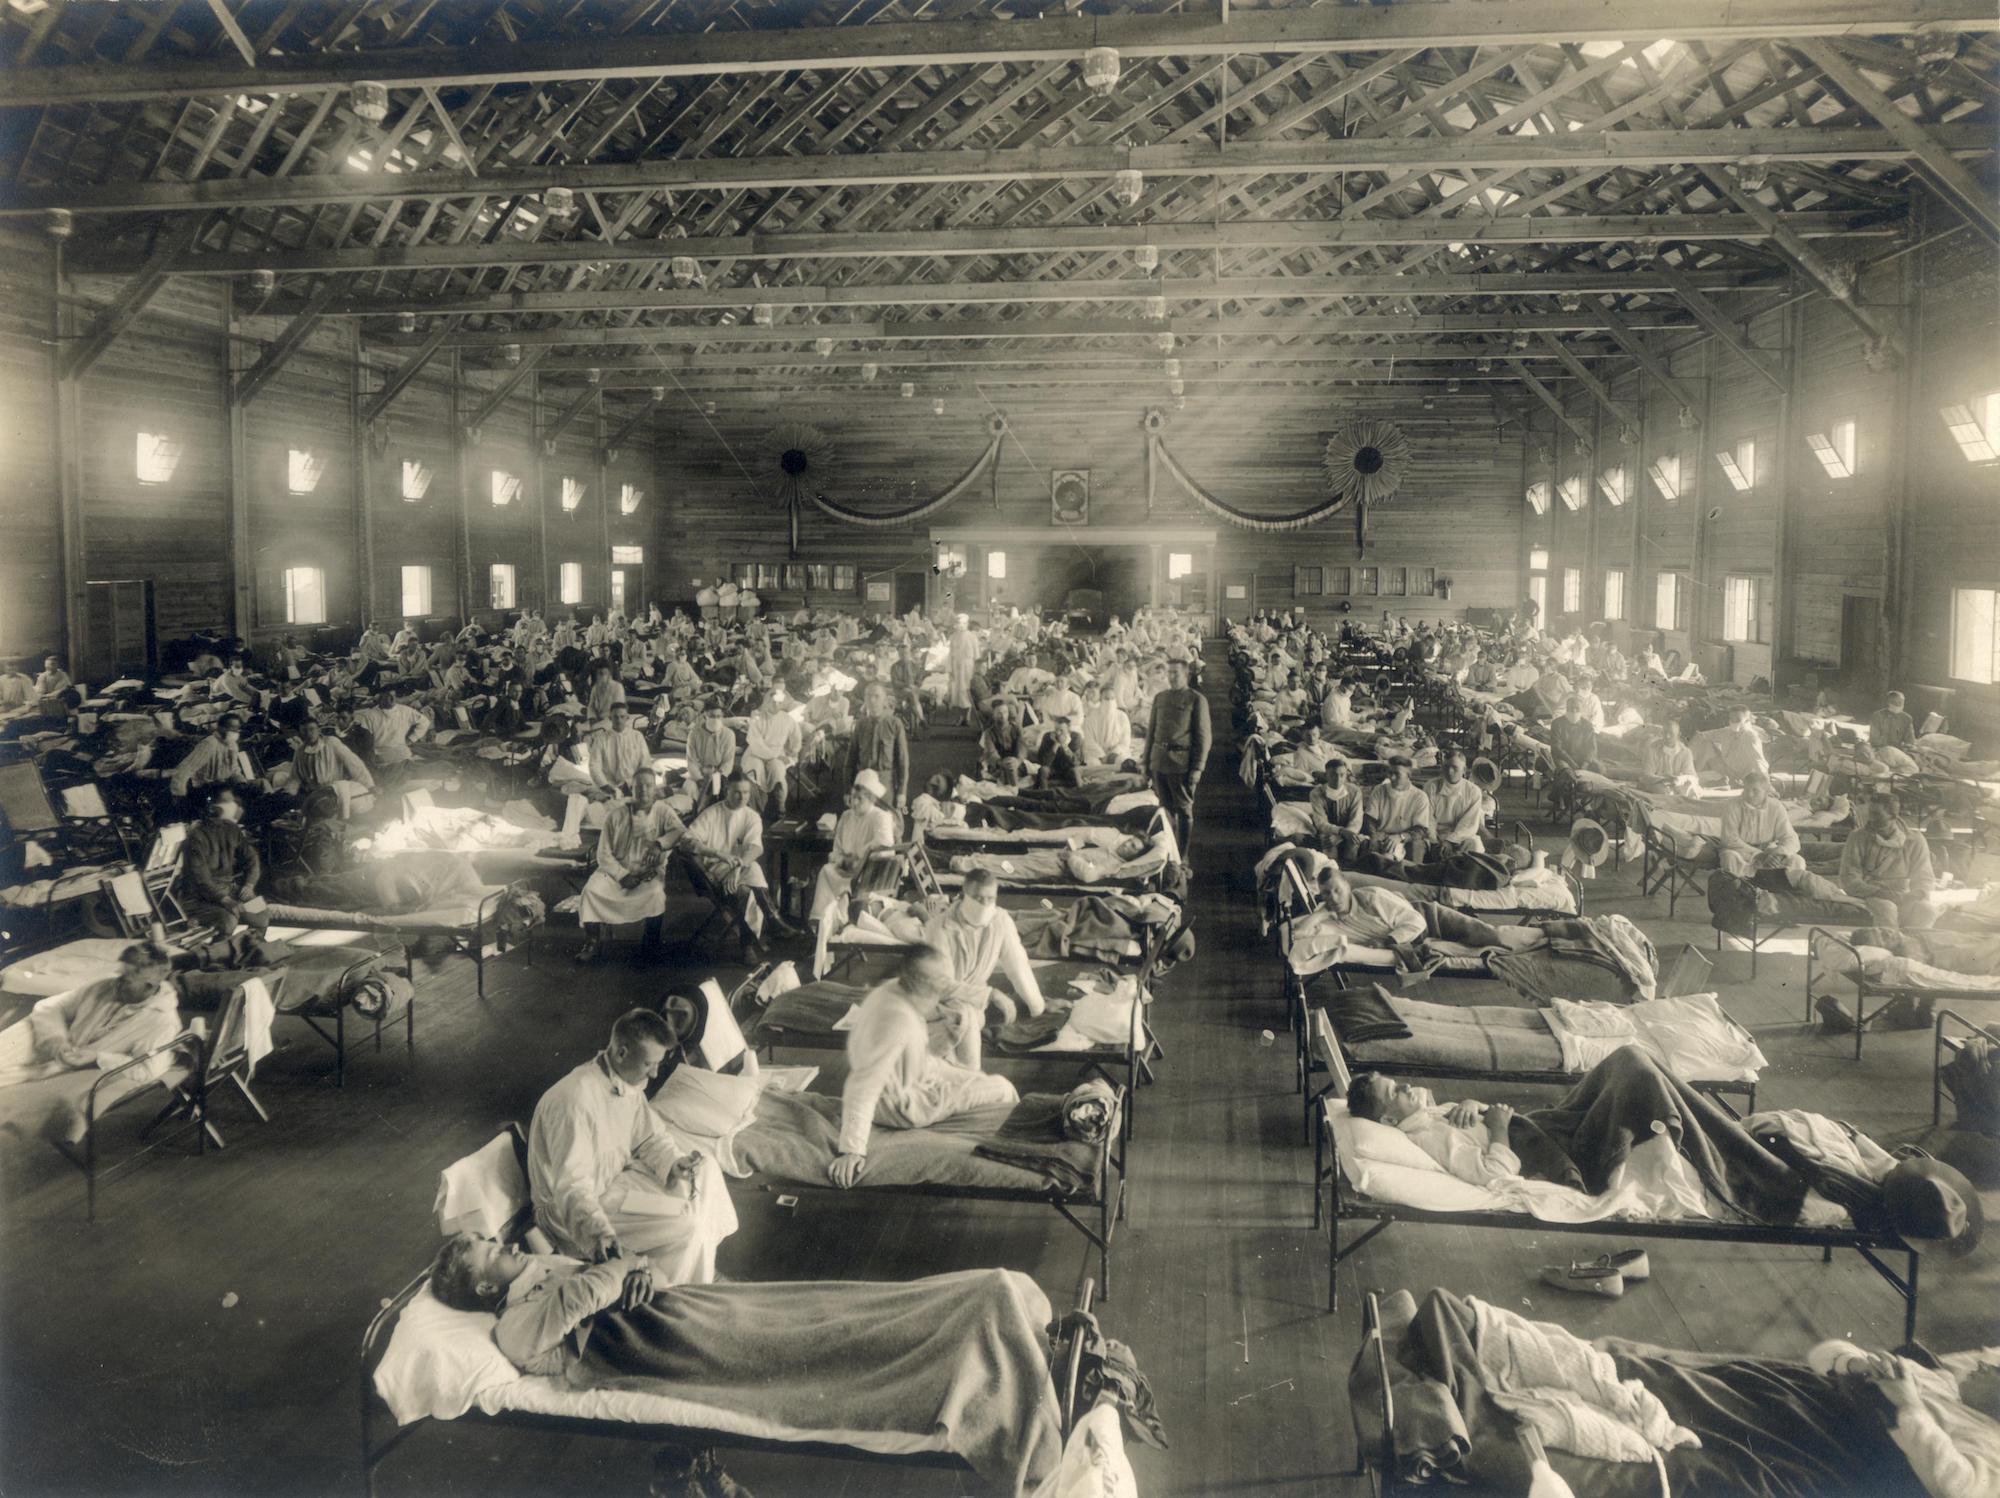 A black and white photograph showing beds with patients in an emergency hospital in Camp Funston, Kansas, in the midst of the 1918 influenza epidemic.